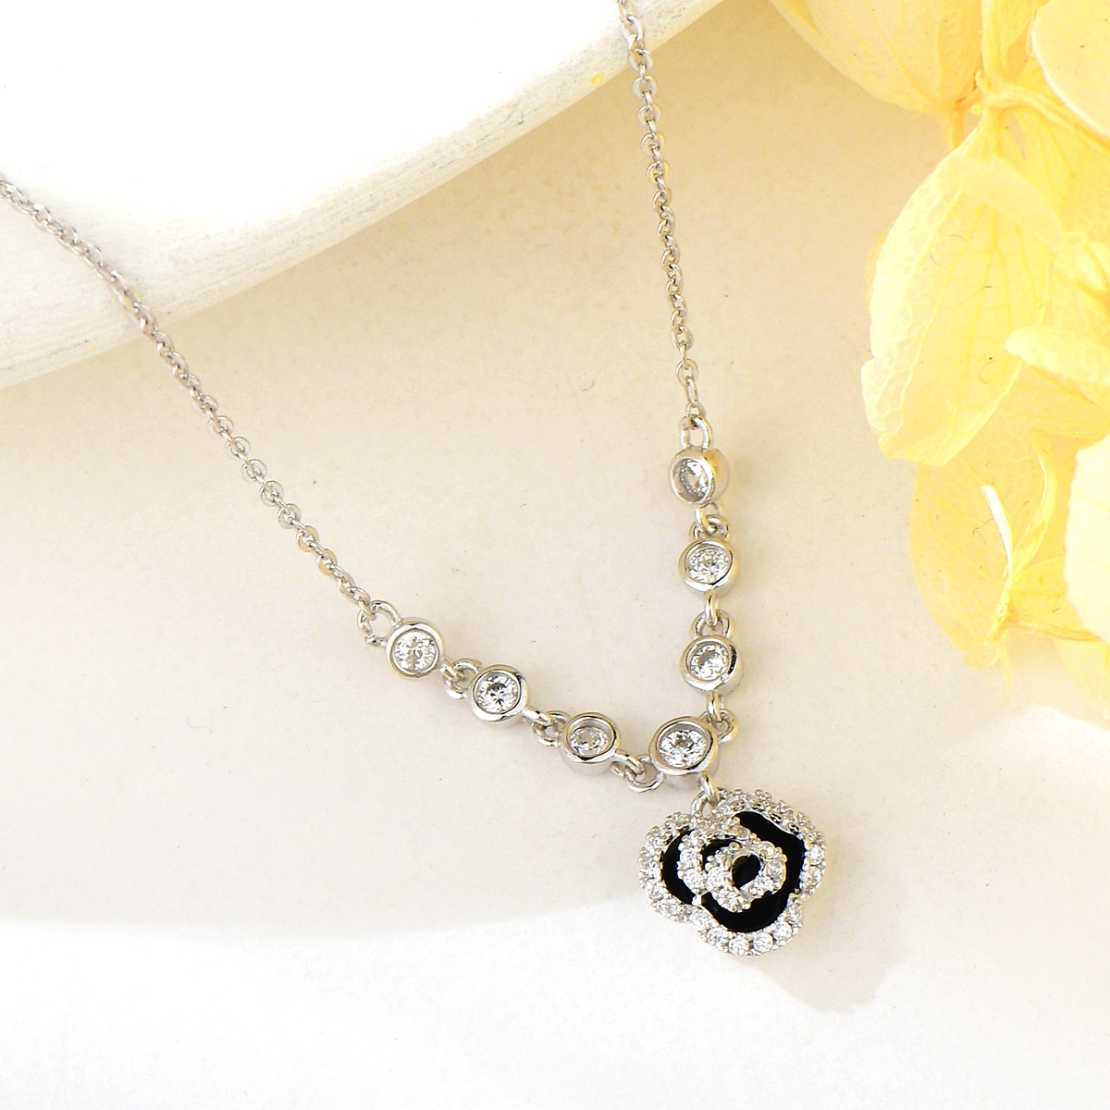 ROSE SILVER NECKLACE